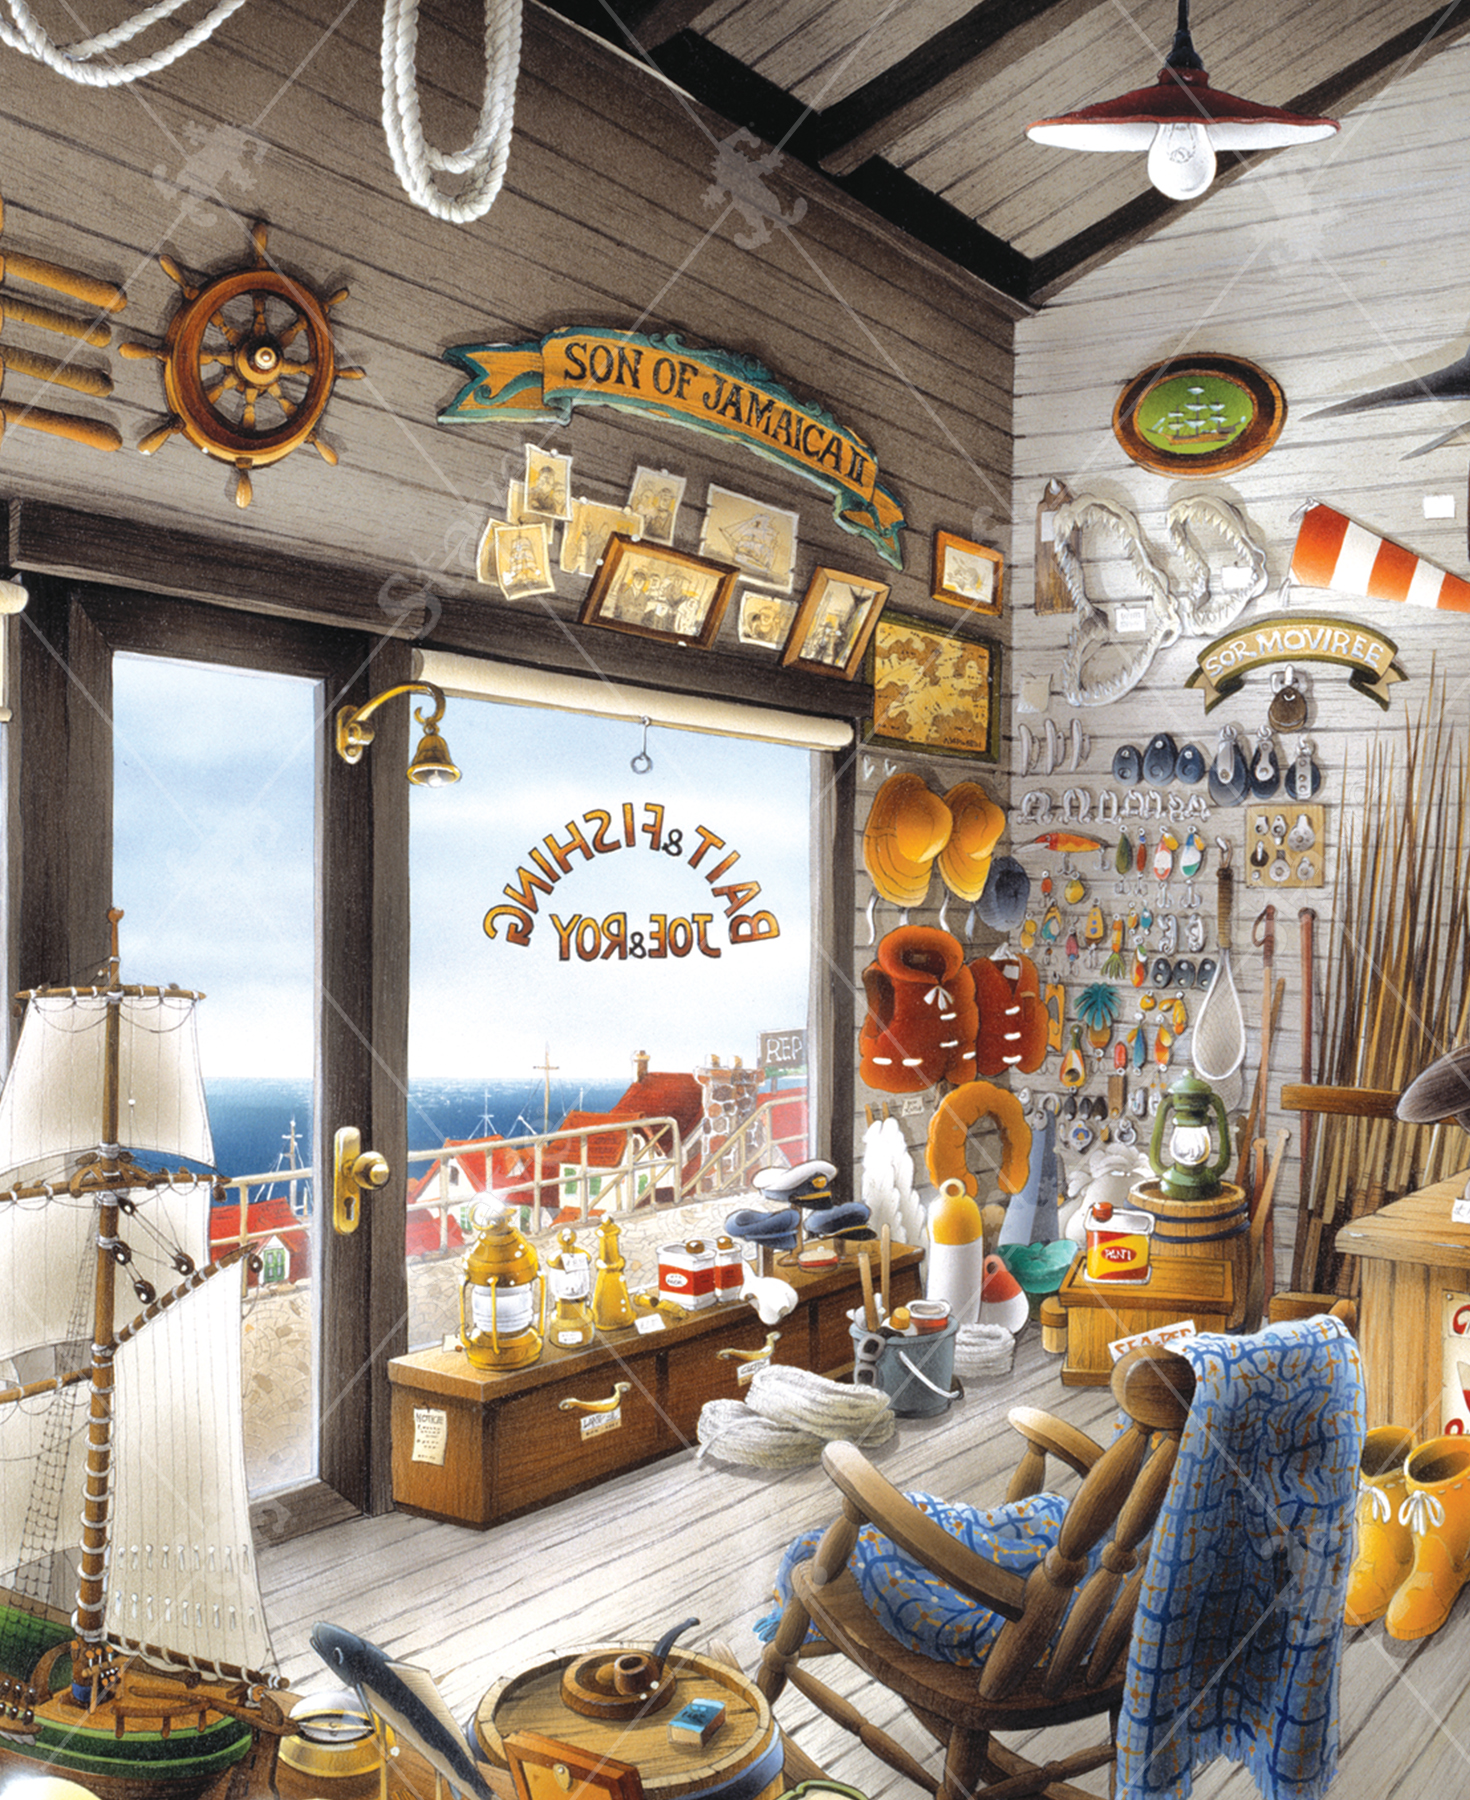 Close-up of Bait Shop wooden jigsaw puzzle displaying the inside of a store full of fishing gear from the floor up to the ceiling. Fishing hooks, life vests, fishing pole, and other gear hang on the wall next to a bookshelf full of even more stuff. In Front of the shelves, boots, oxygen tanks, and oars sit on the floor by a rocking chair.